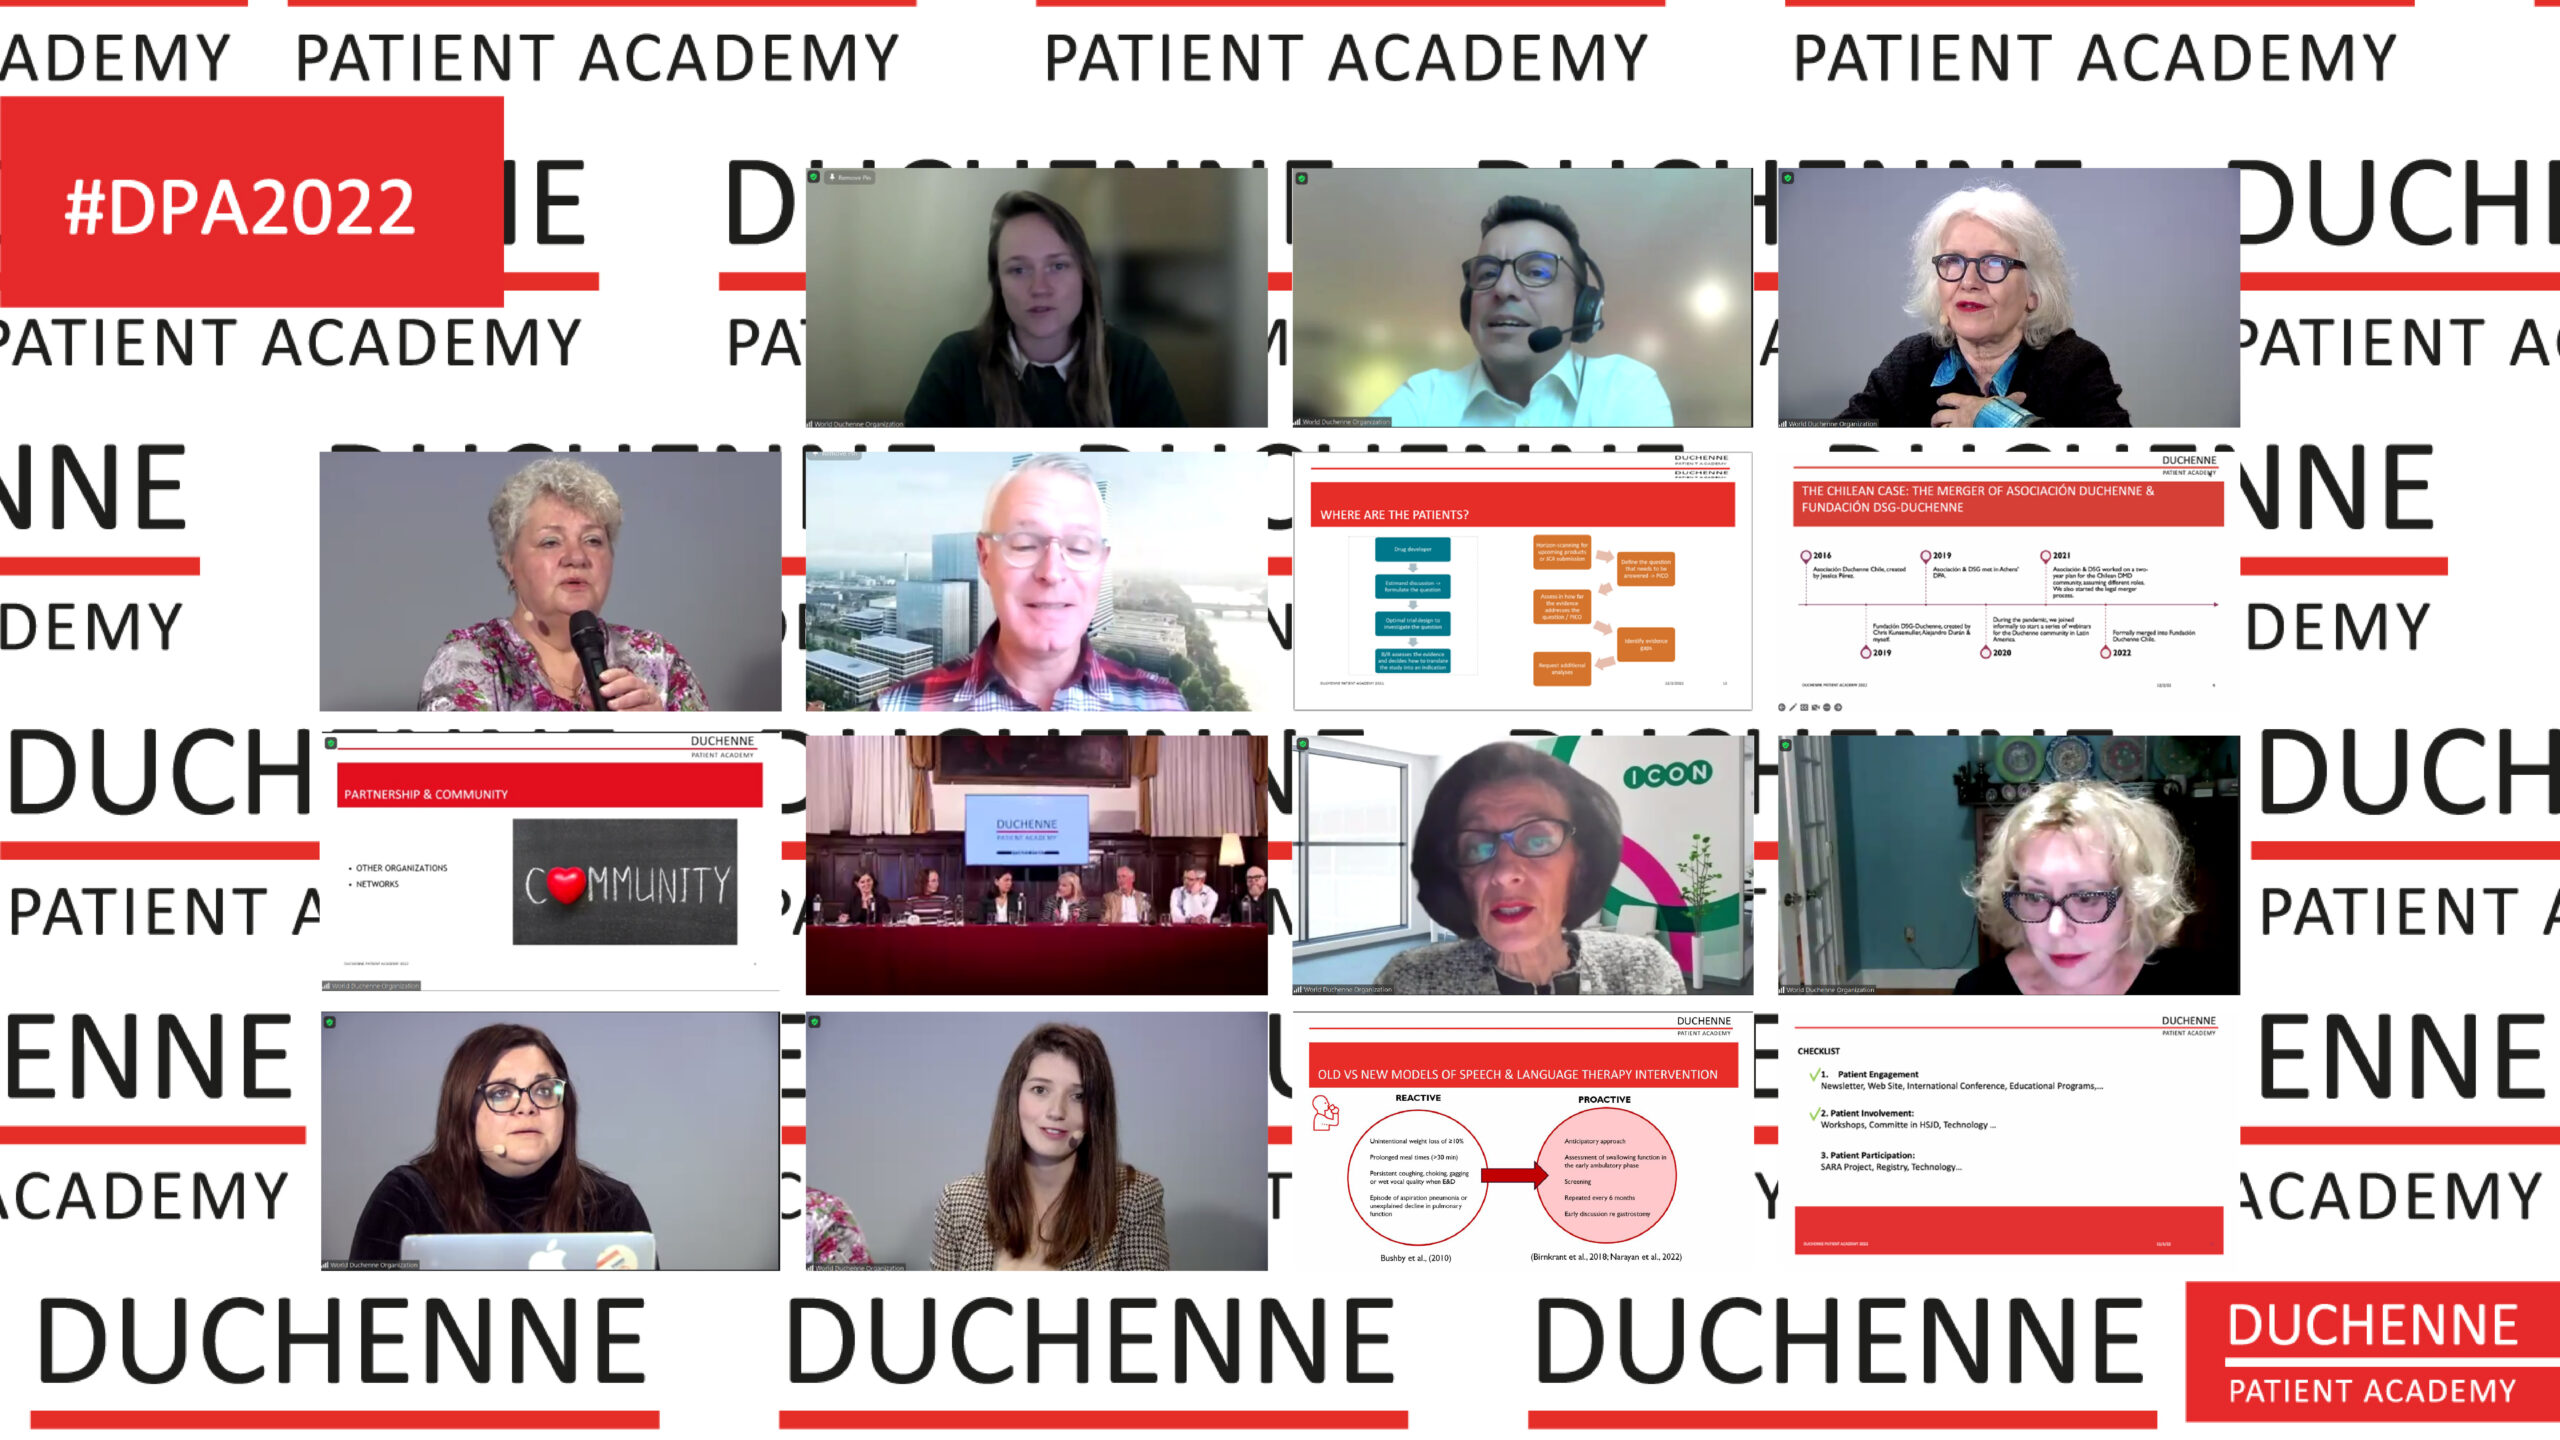 Duchenne Patient Academy 2022 successfully concluded